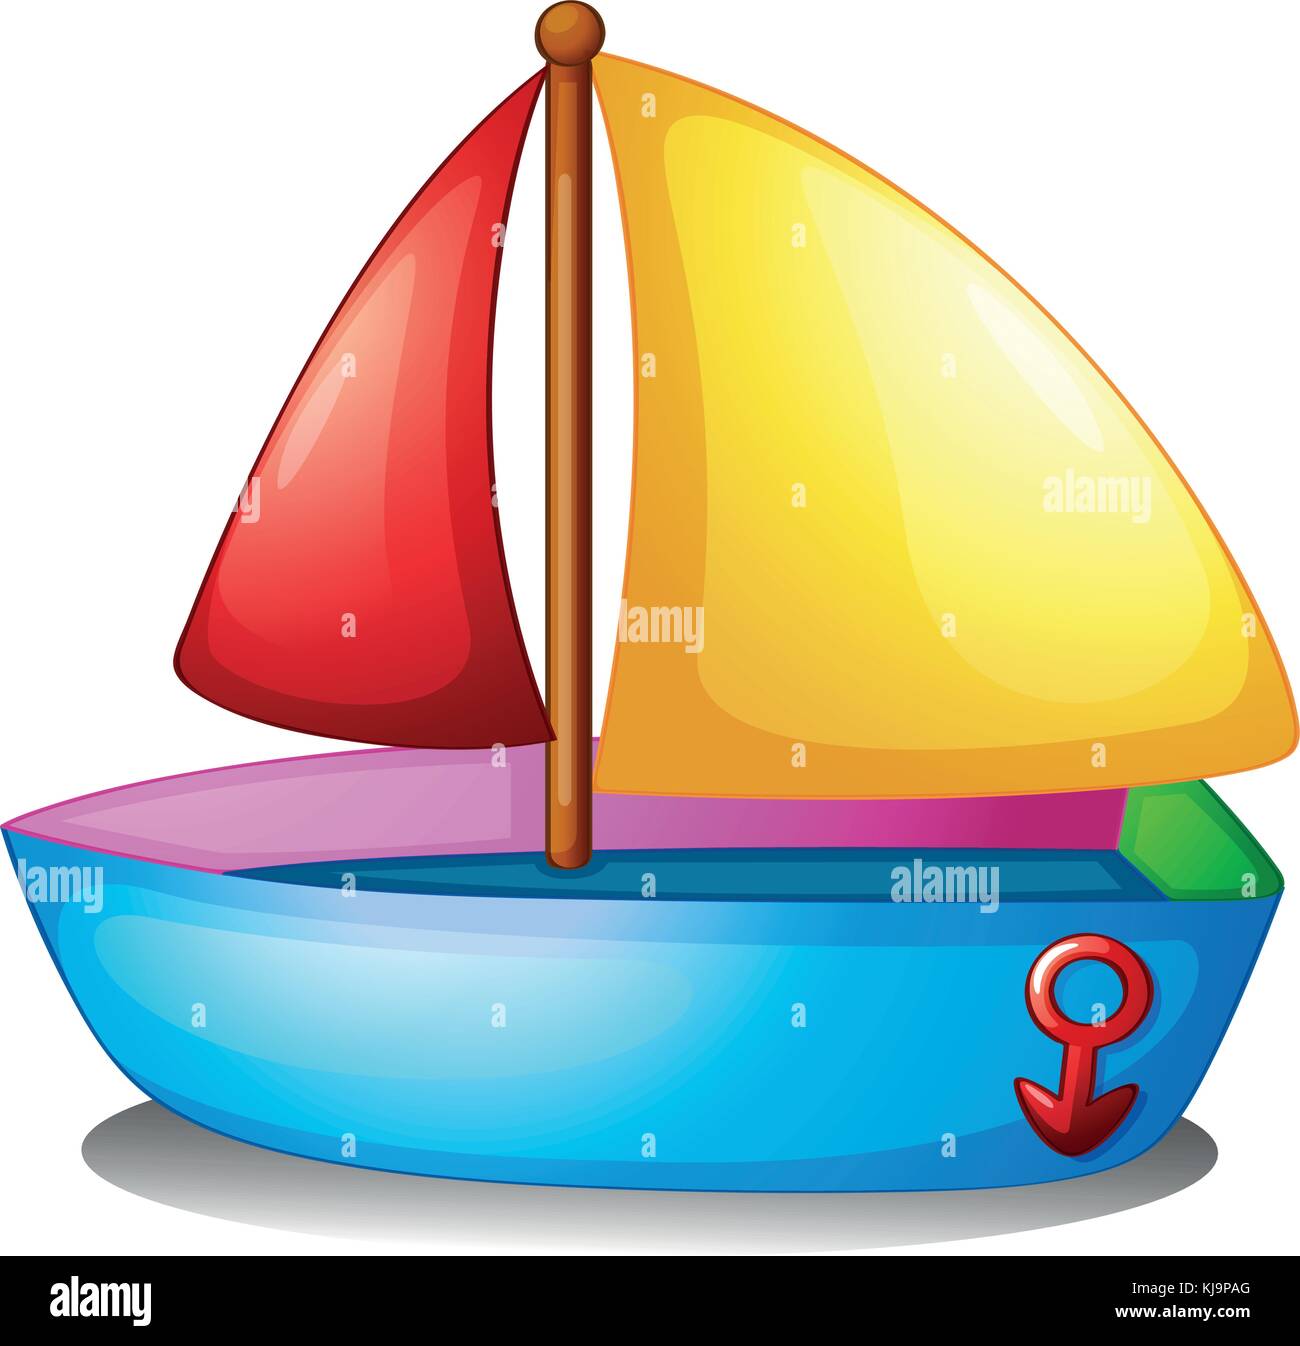 Illustration of a colorful boat on a white background Stock Vector